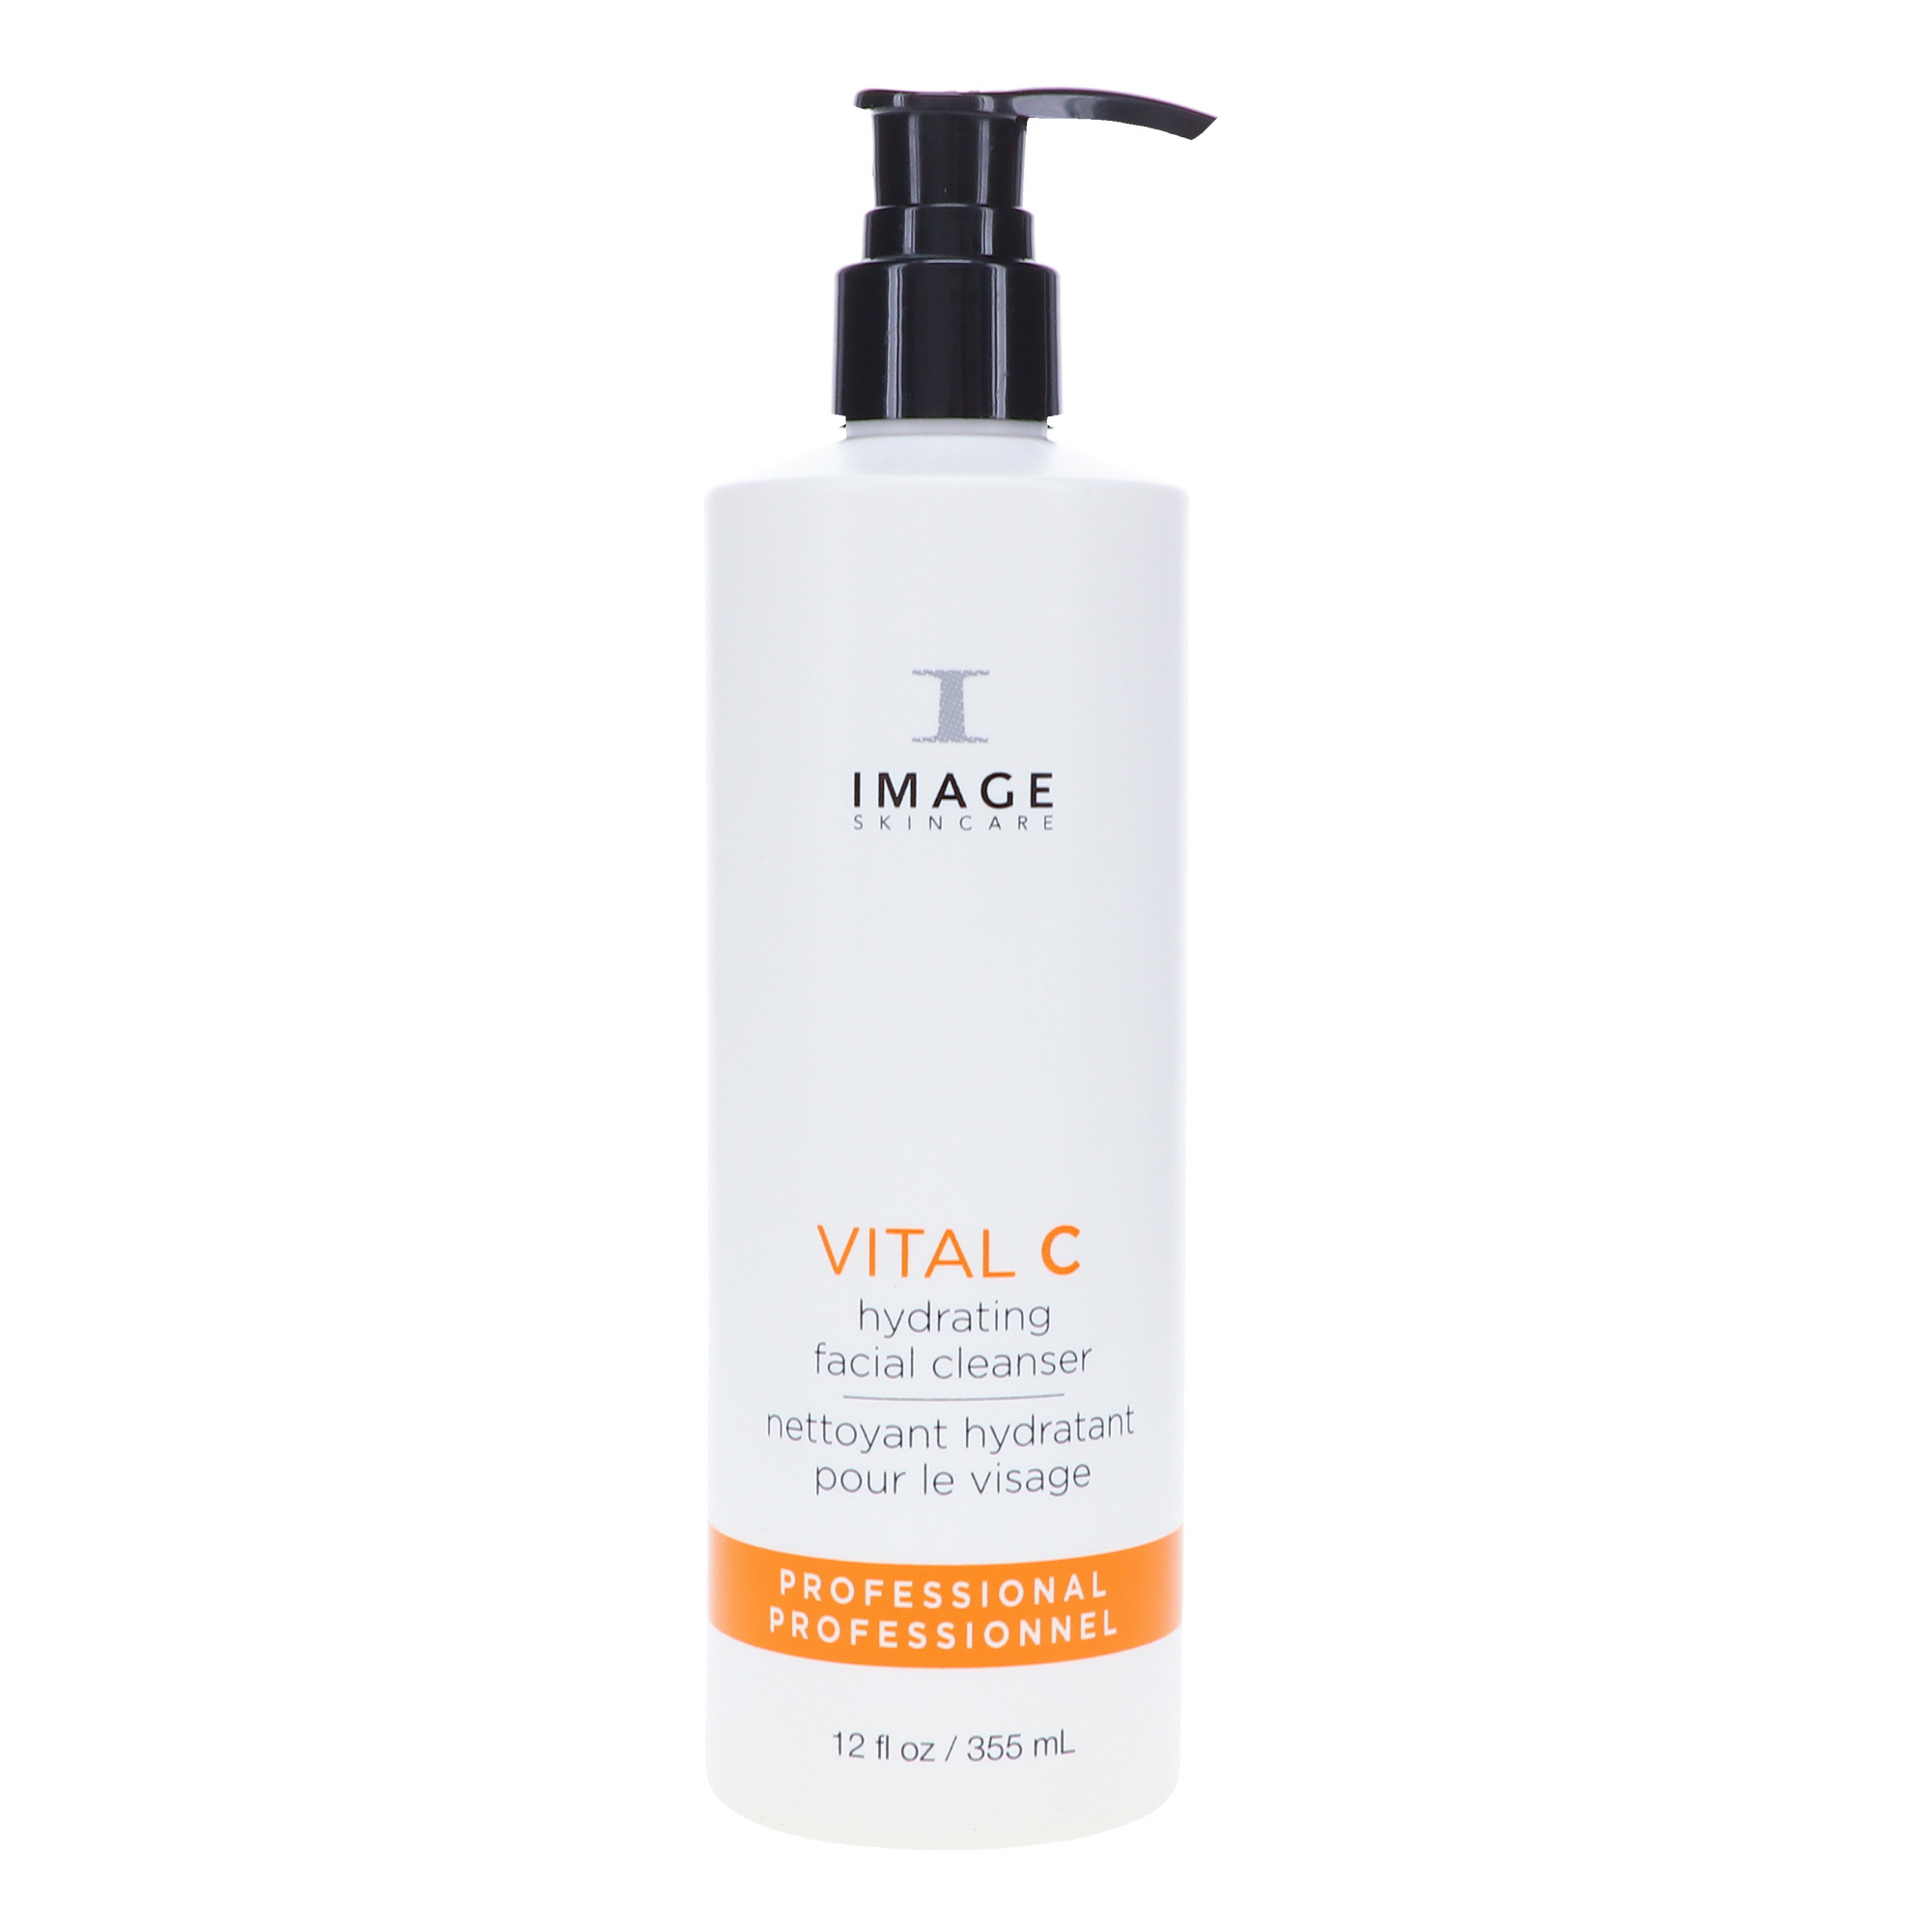 IMAGE Skincare Vital C Hydrating Facial Cleanser 12 oz - image 1 of 9